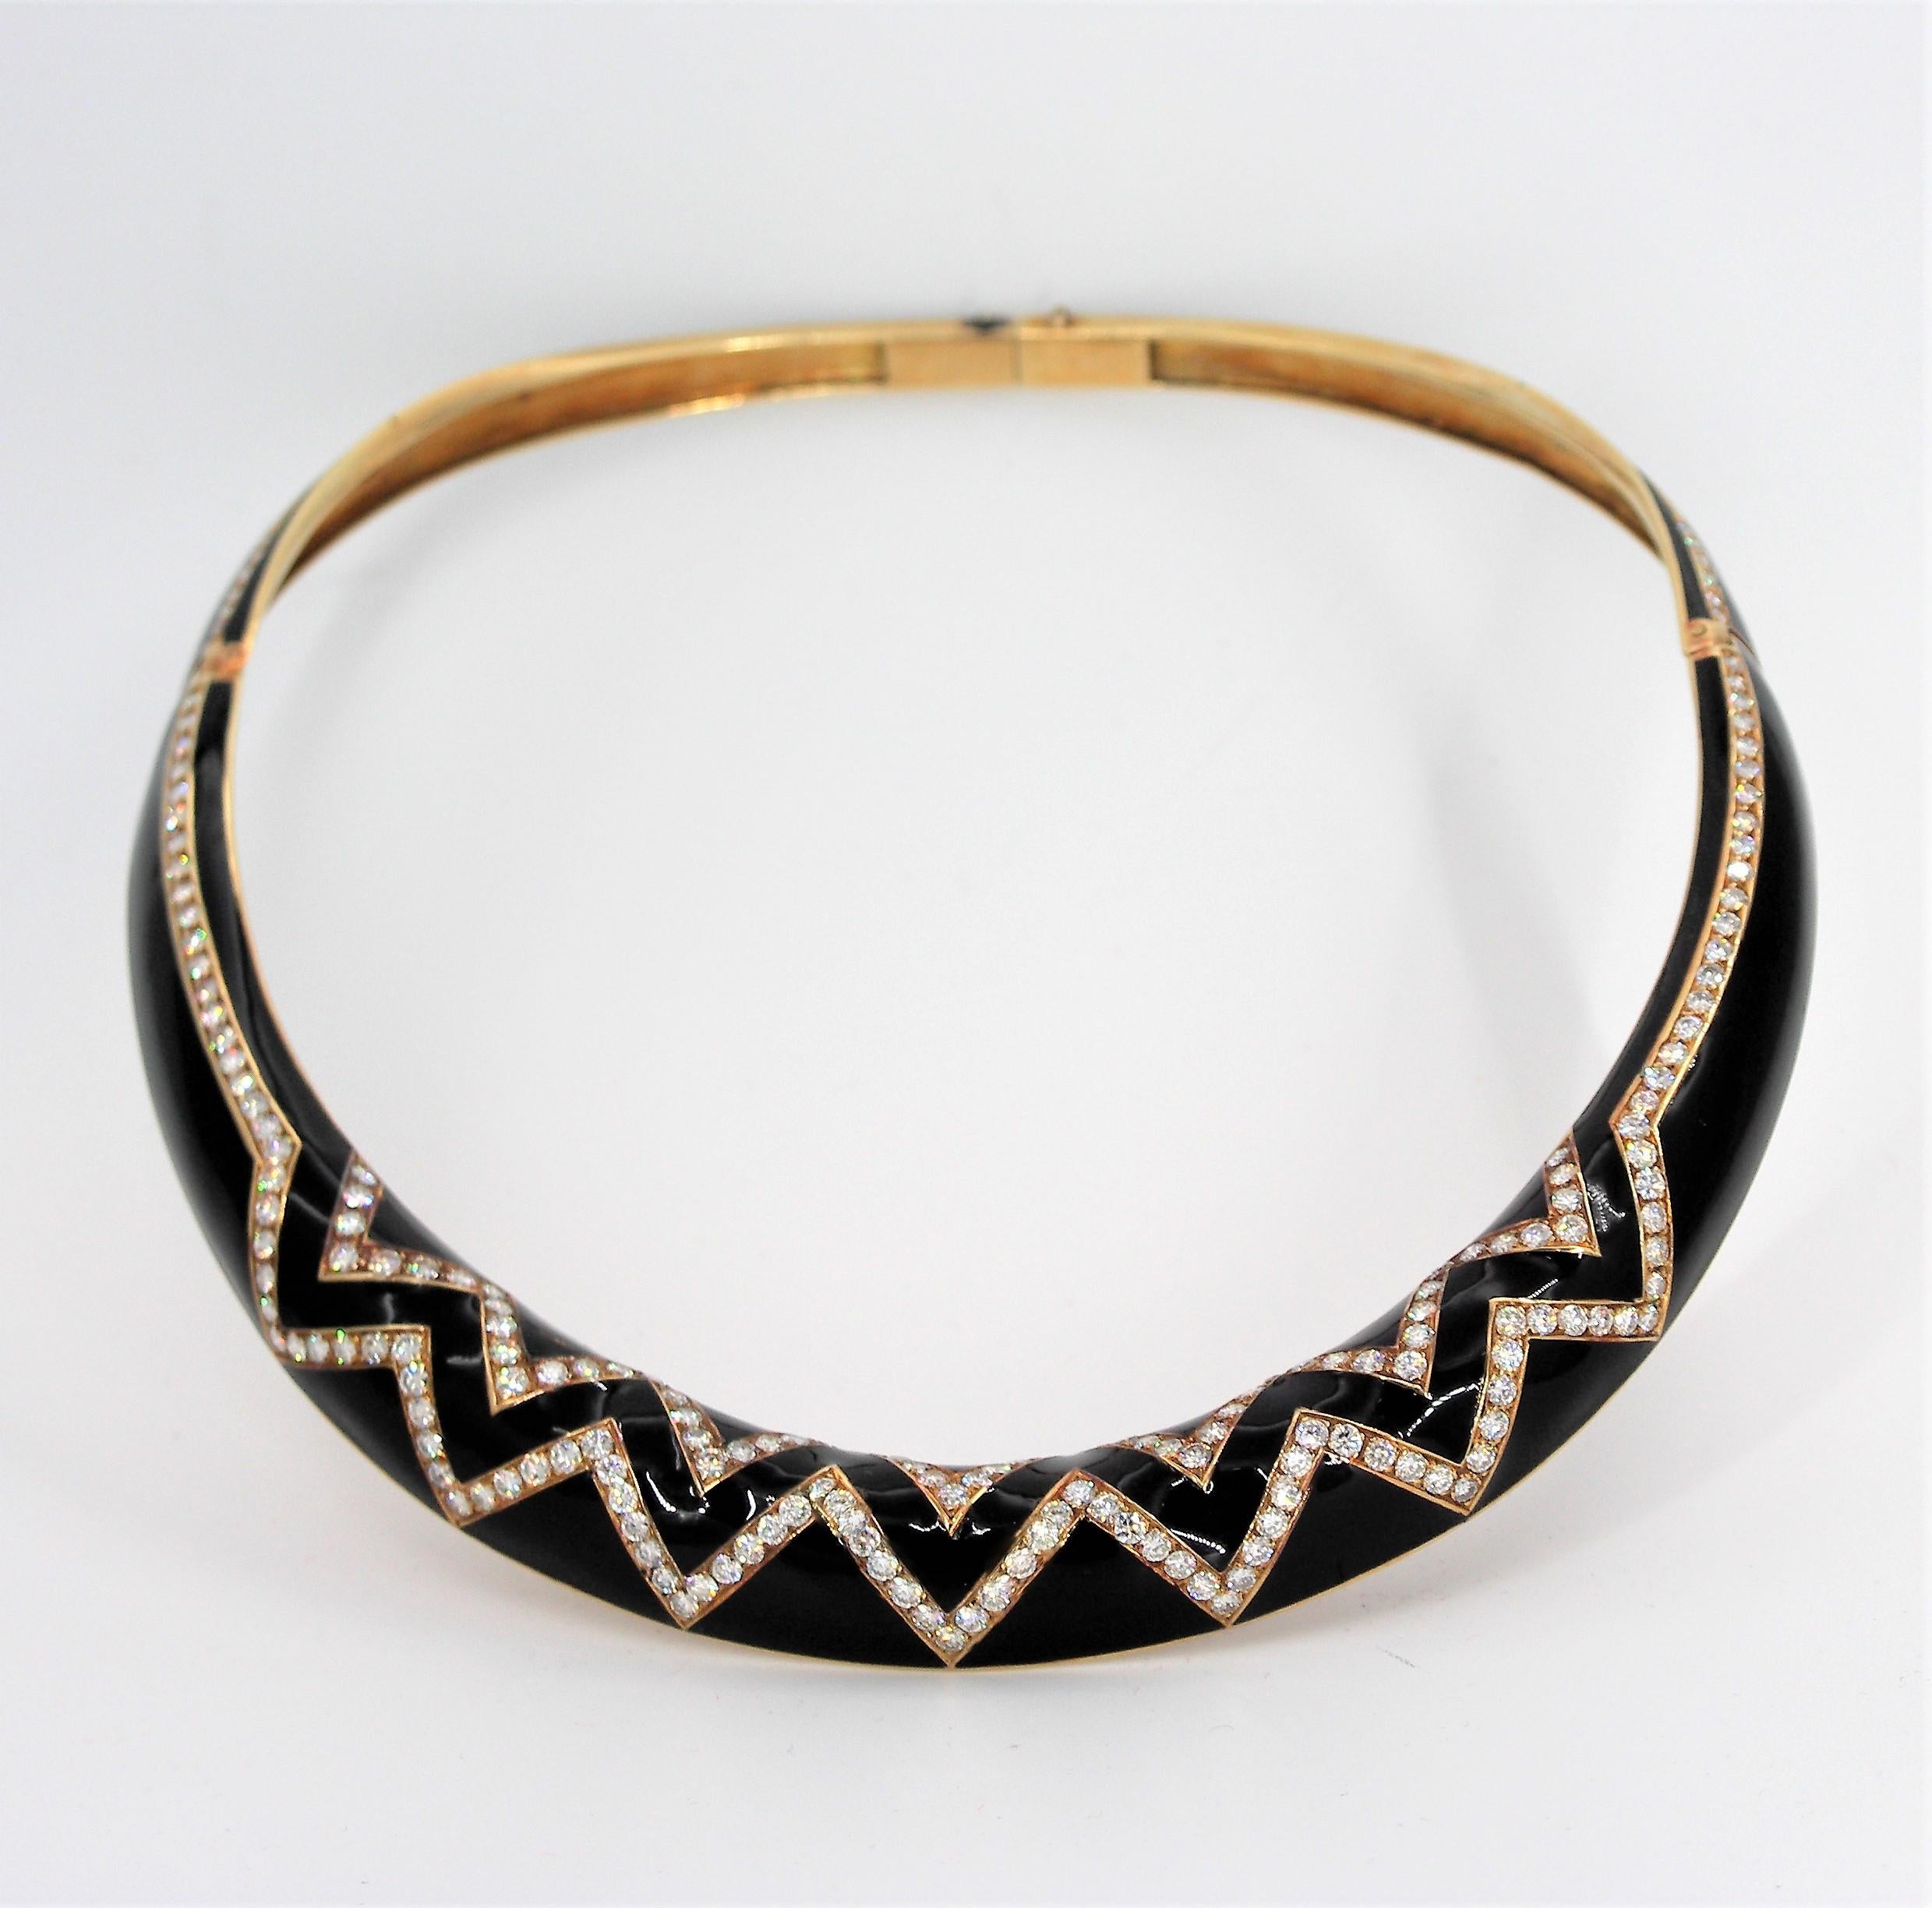 Made of 18K yellow gold, this tailored, rigid, collar is set with assorted round brilliant cut diamonds weighing an approximate total of 9.00ct. of overall H color and VS2-SI1 charity.
The black enamel goes all the way around the collar and is in